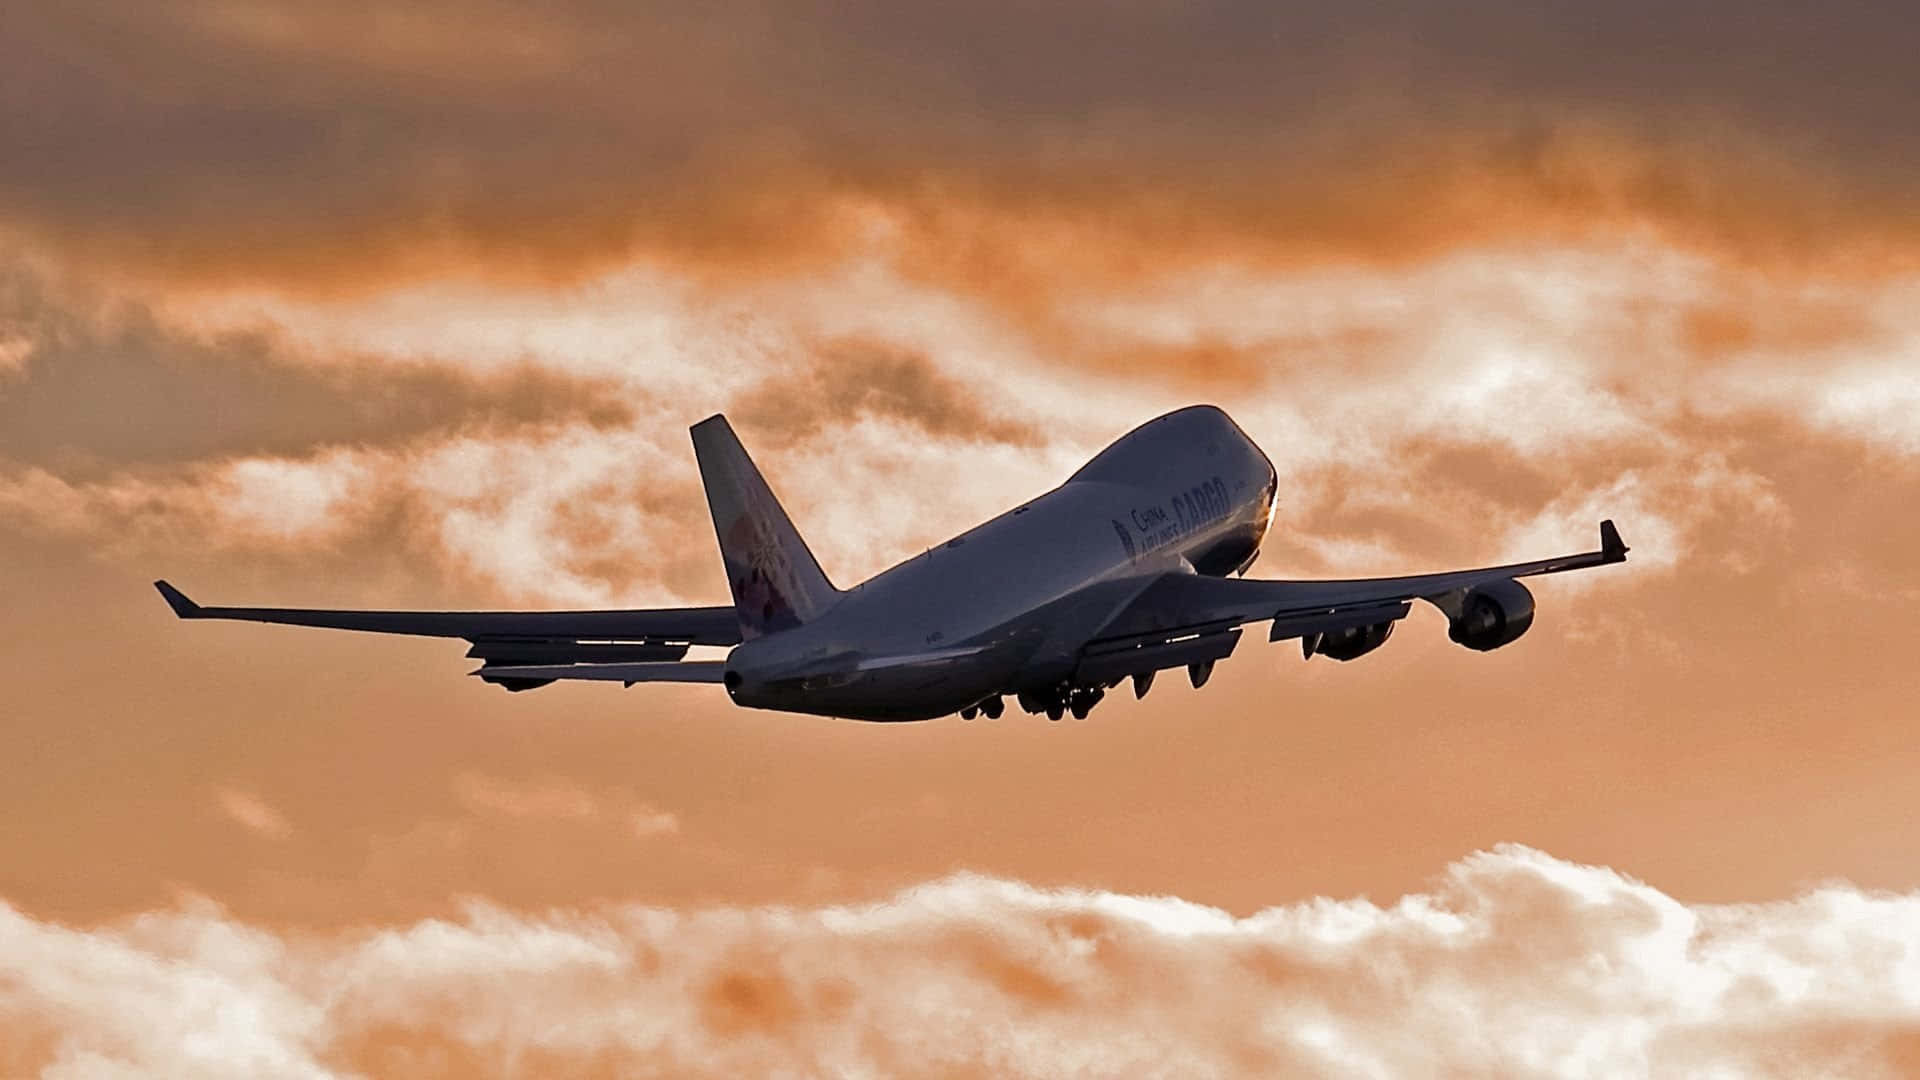 “Climb Aboard a Classic: A Boeing 747 Airliner in Flight” Wallpaper